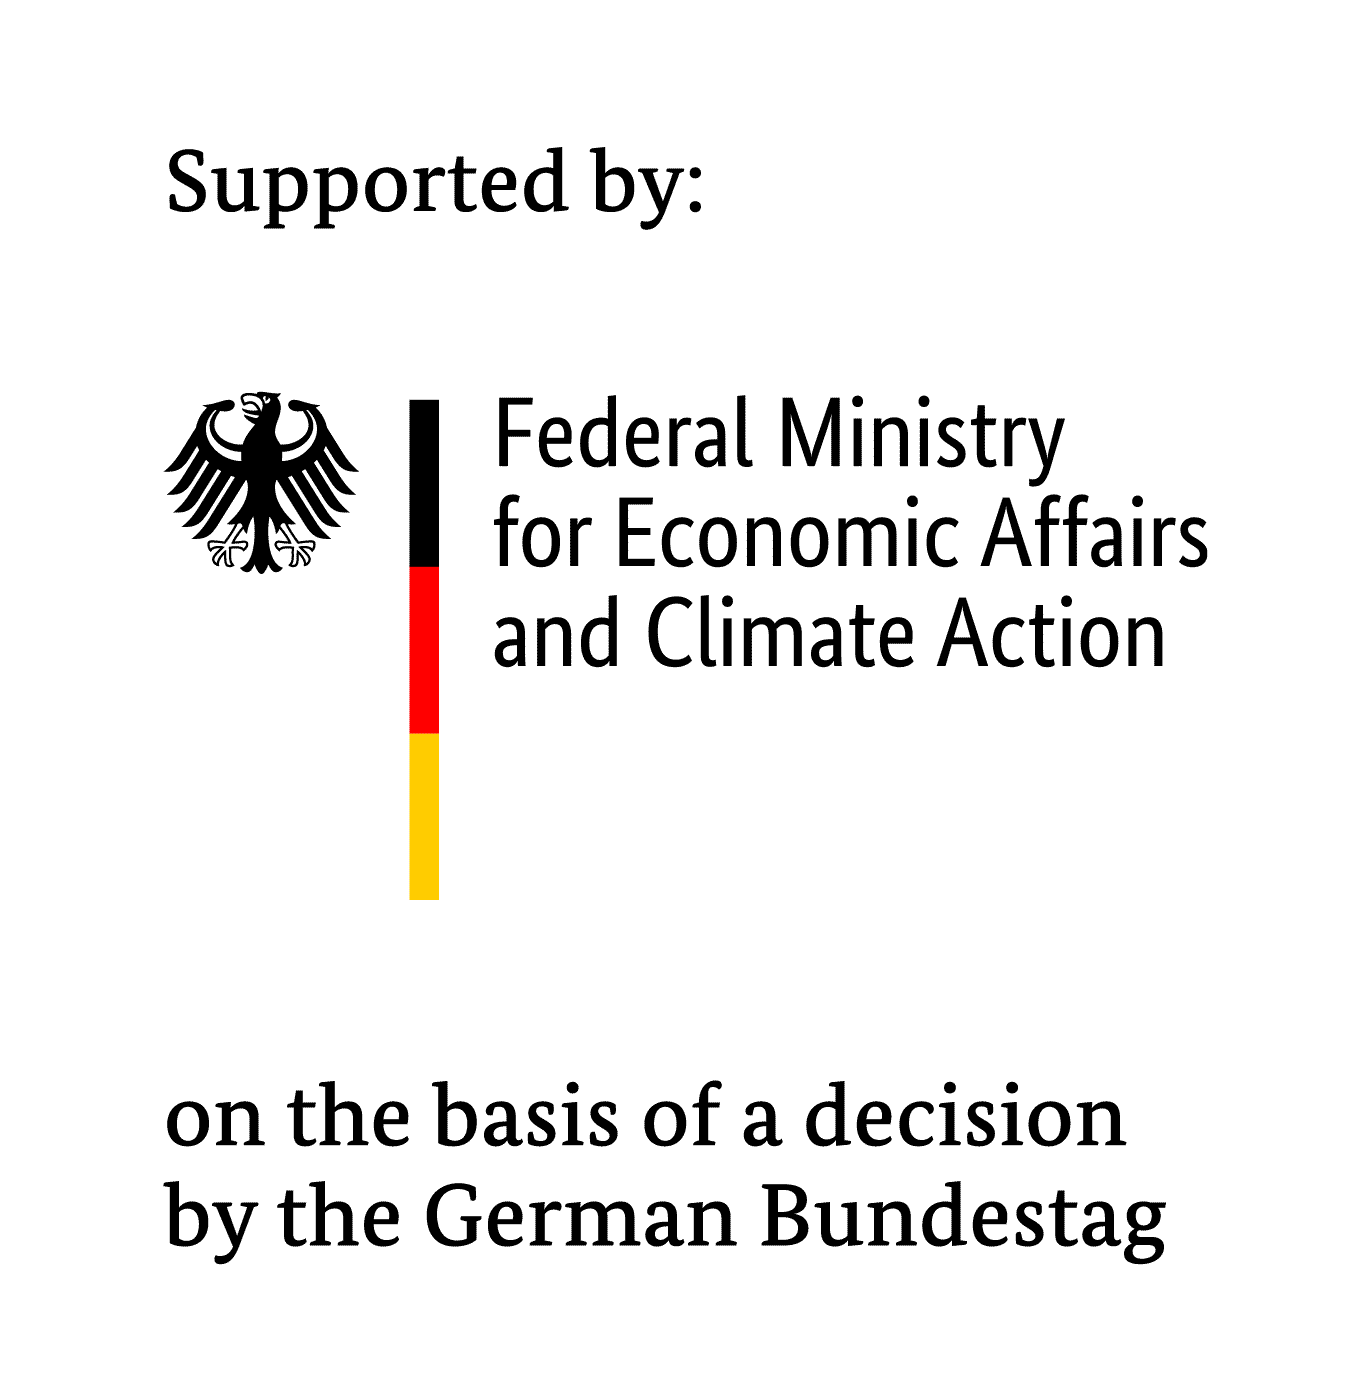 Support Logo of the Federal Ministry for Economic Affairs and Climate Action